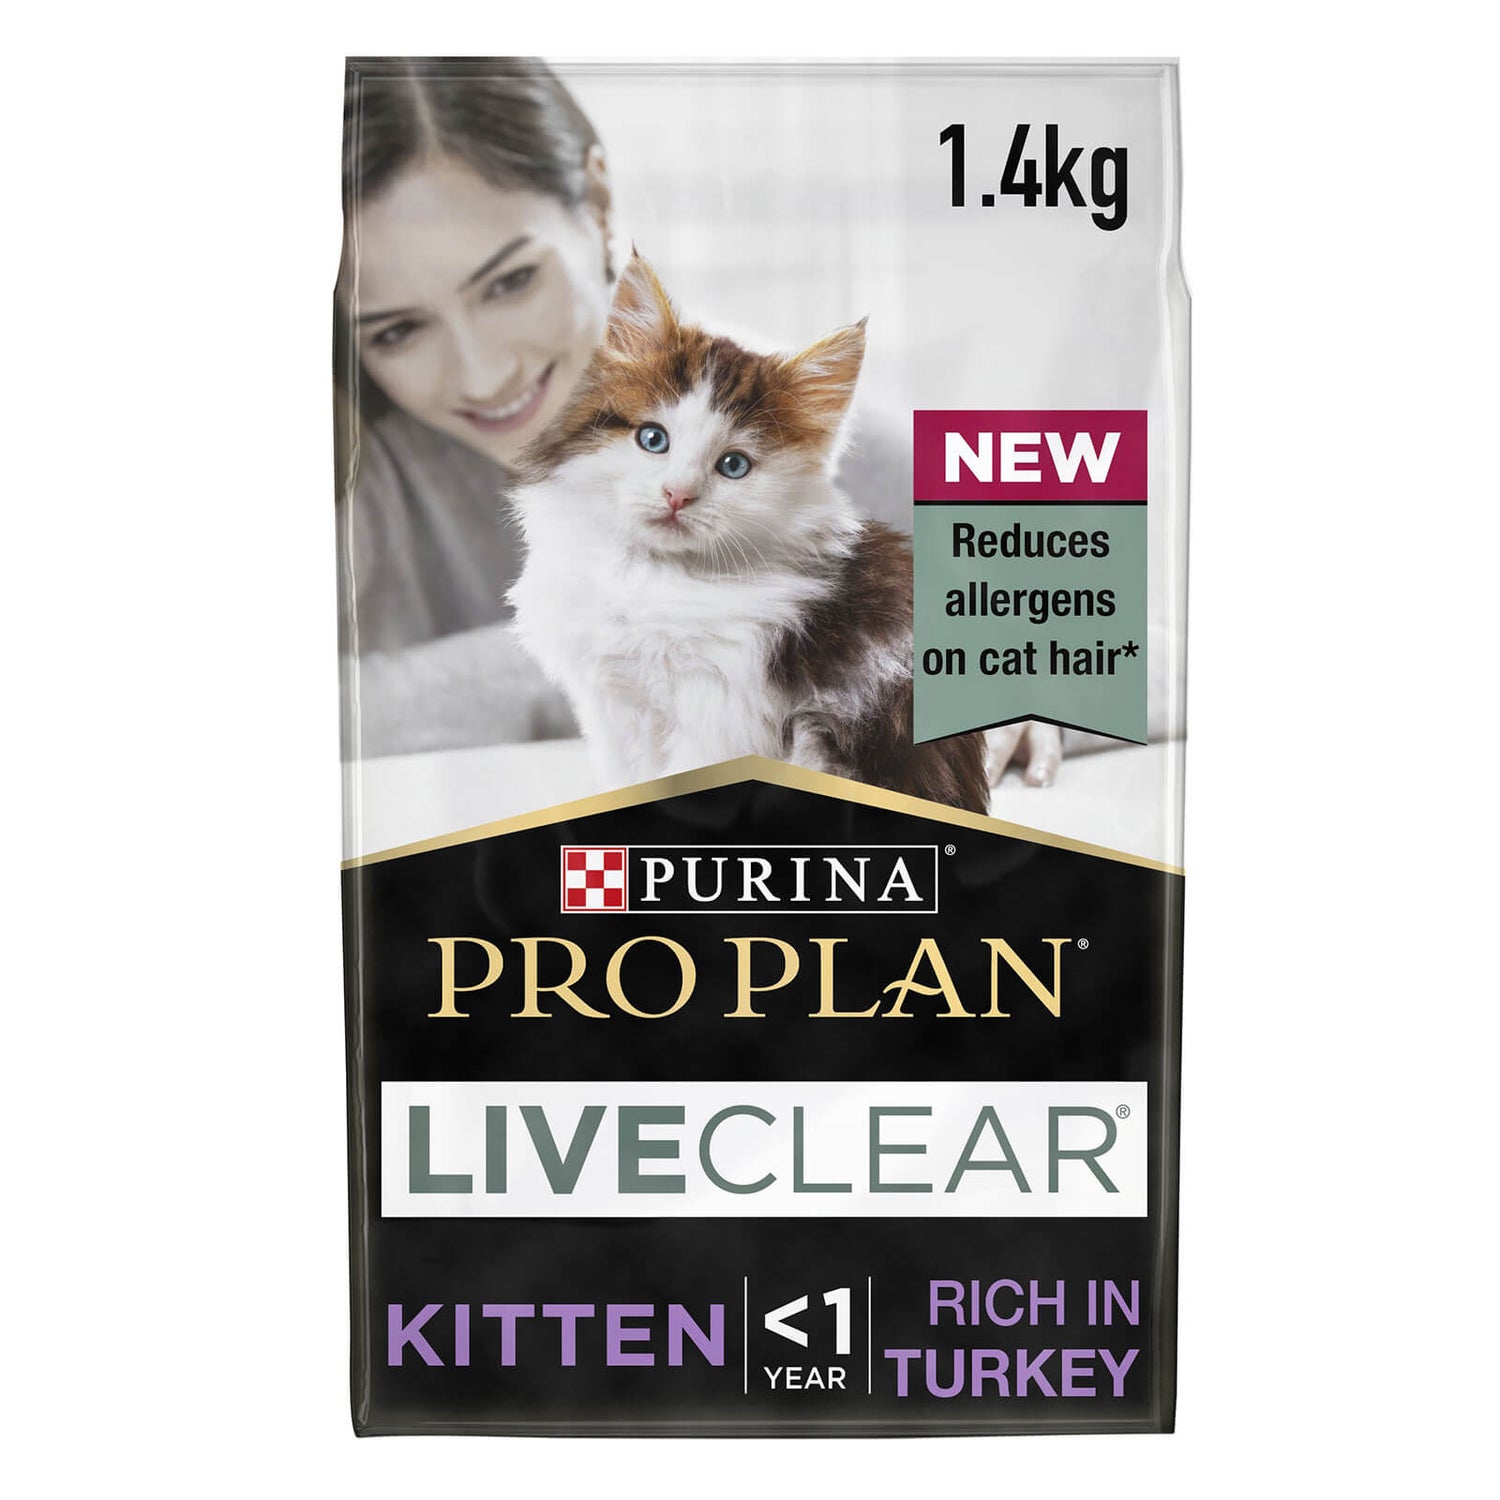 PRO PLAN LiveClear Cat-Allergen Reducing Kitten Dry Cat Food with Turkey 1.4kg